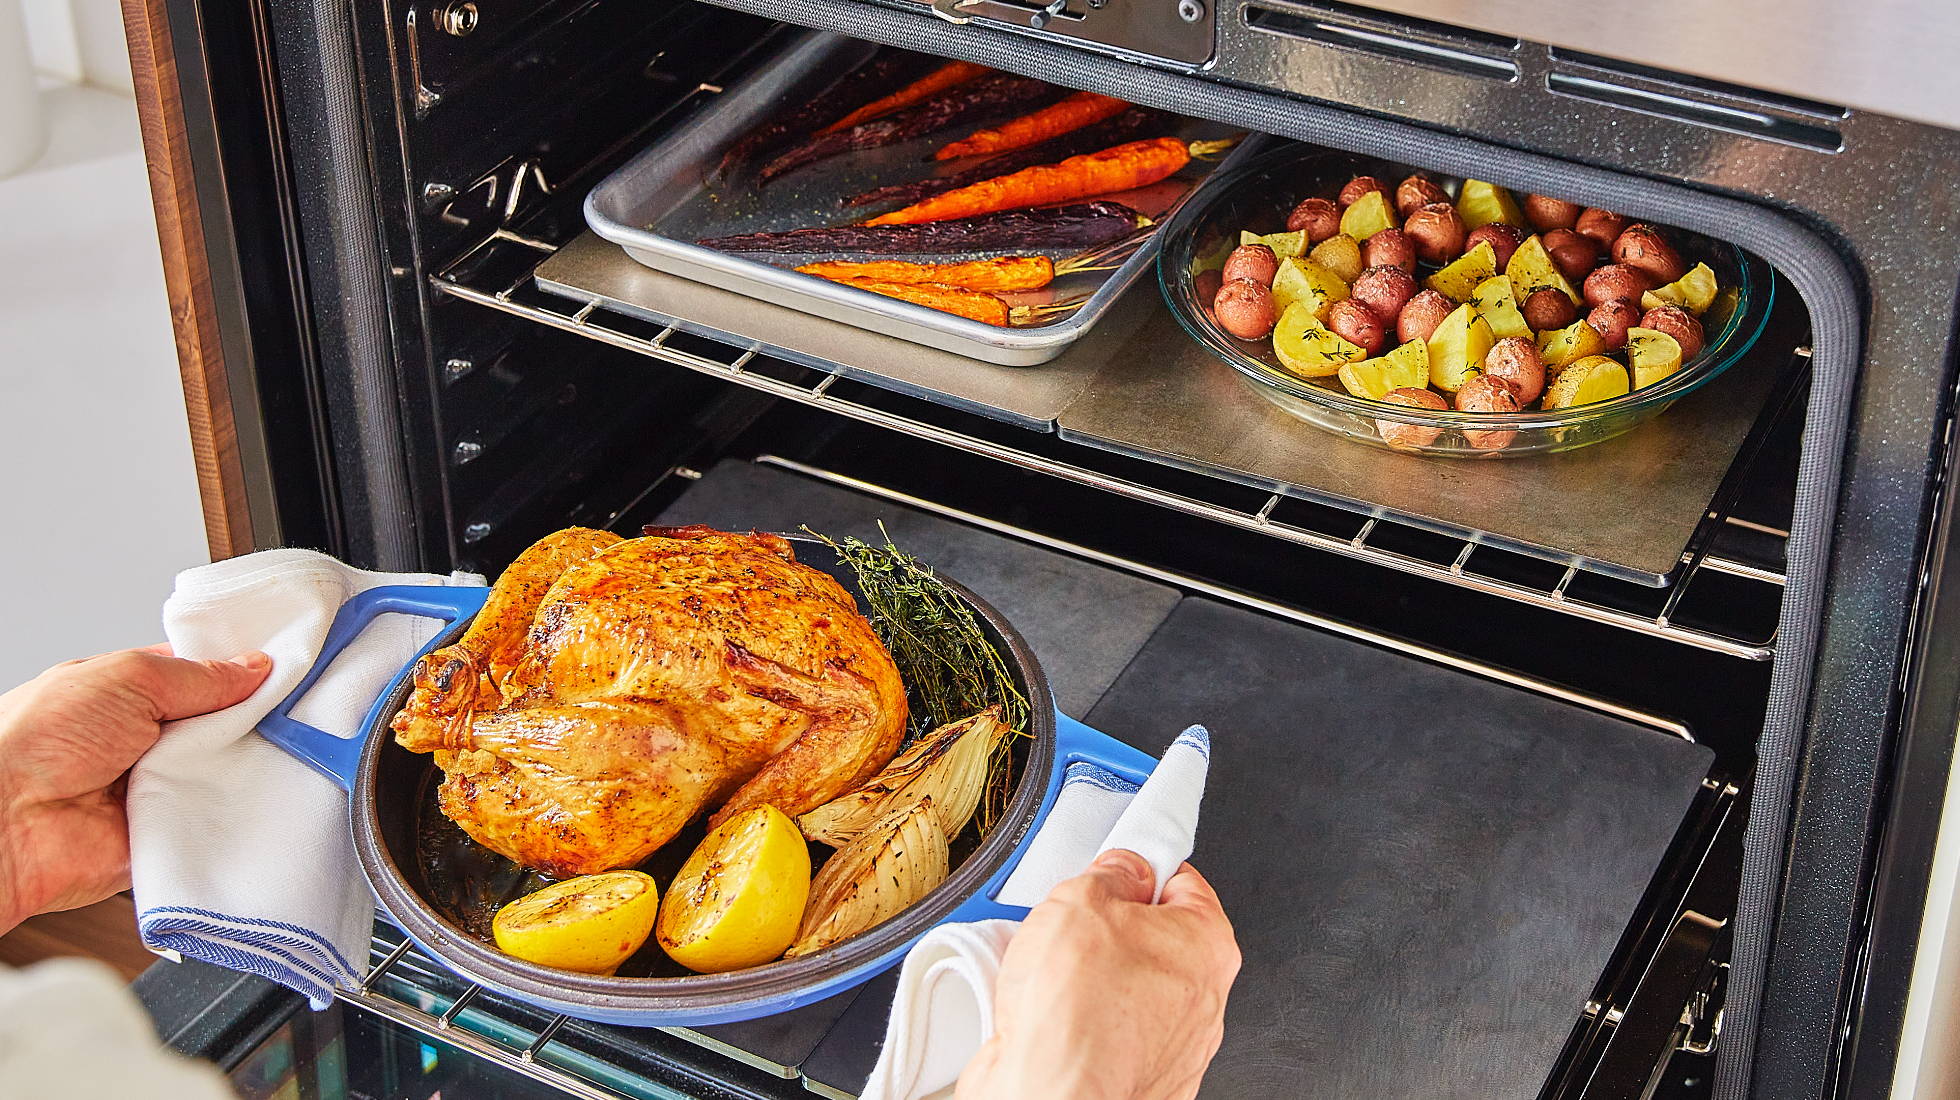 Hands place a roast chicken on a low oven rack atop a Misen Oven Steel. Two more Oven Steels are visible on the top rack beneath pans of vegetables.